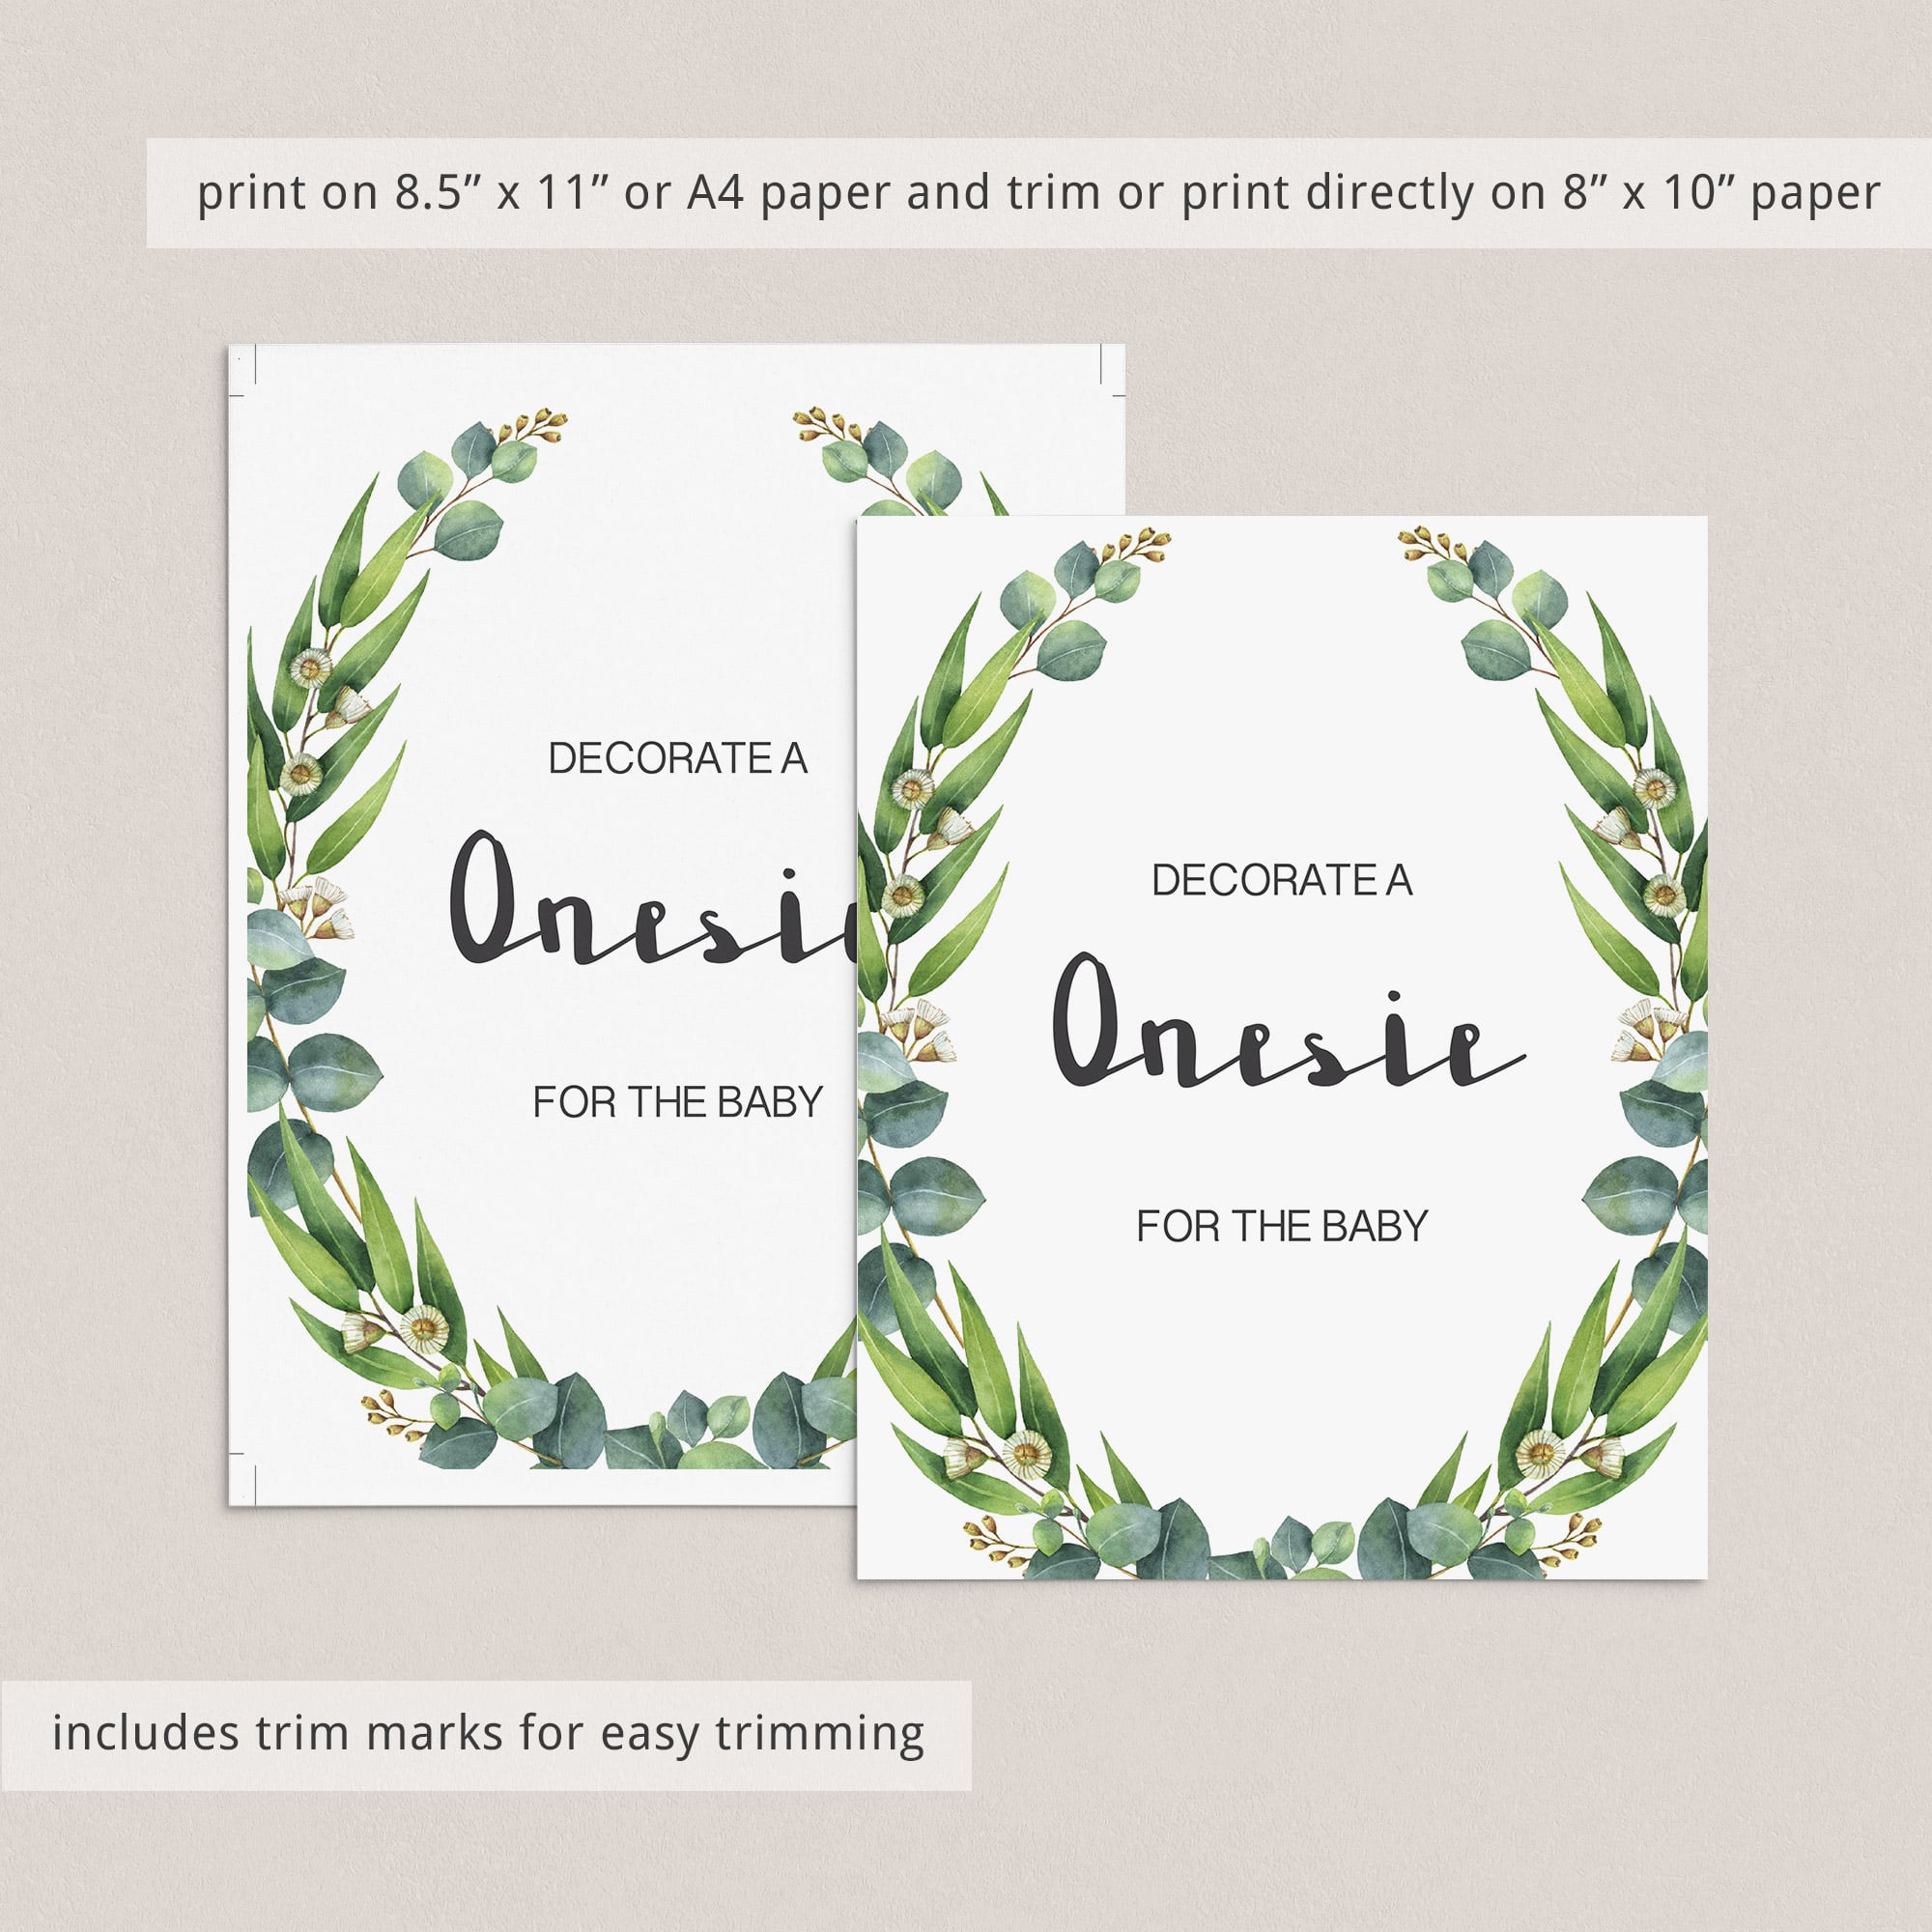 Onesie decorating station instant download table sign by LittleSizzle